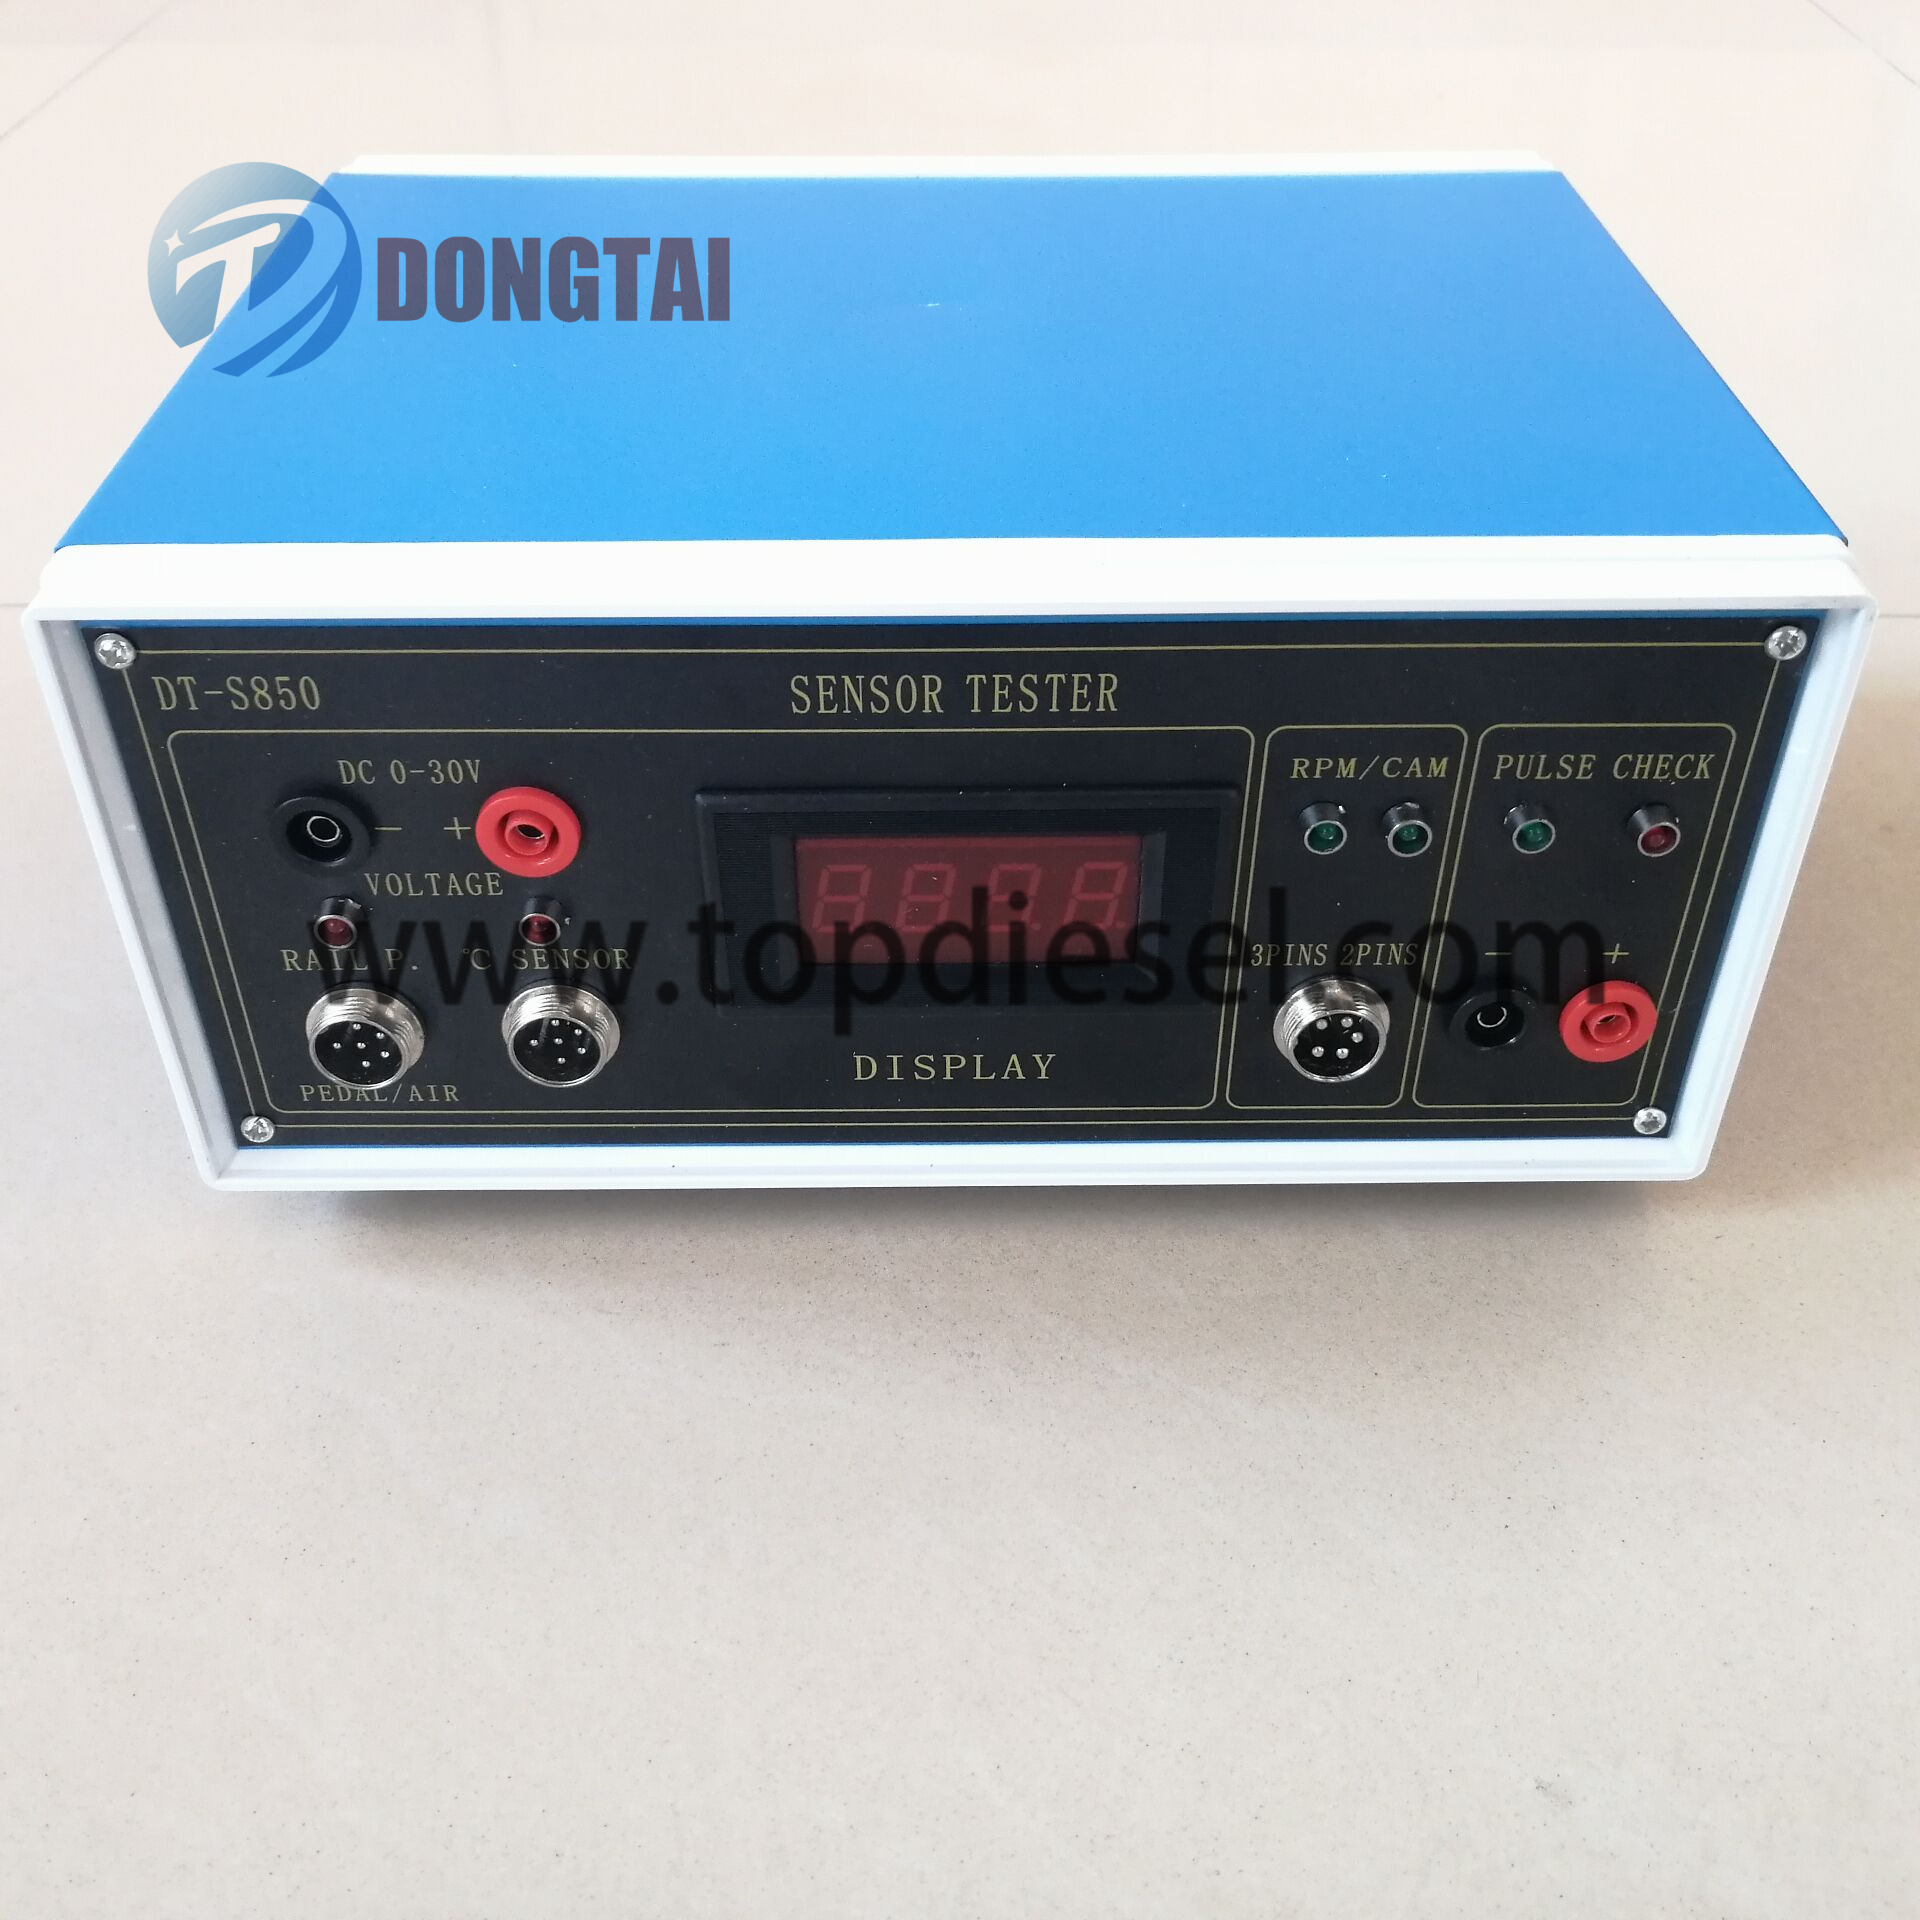 Special Price for Diesel Engine Injector 4913770 - DT-S850 Sensor Tester – Dongtai